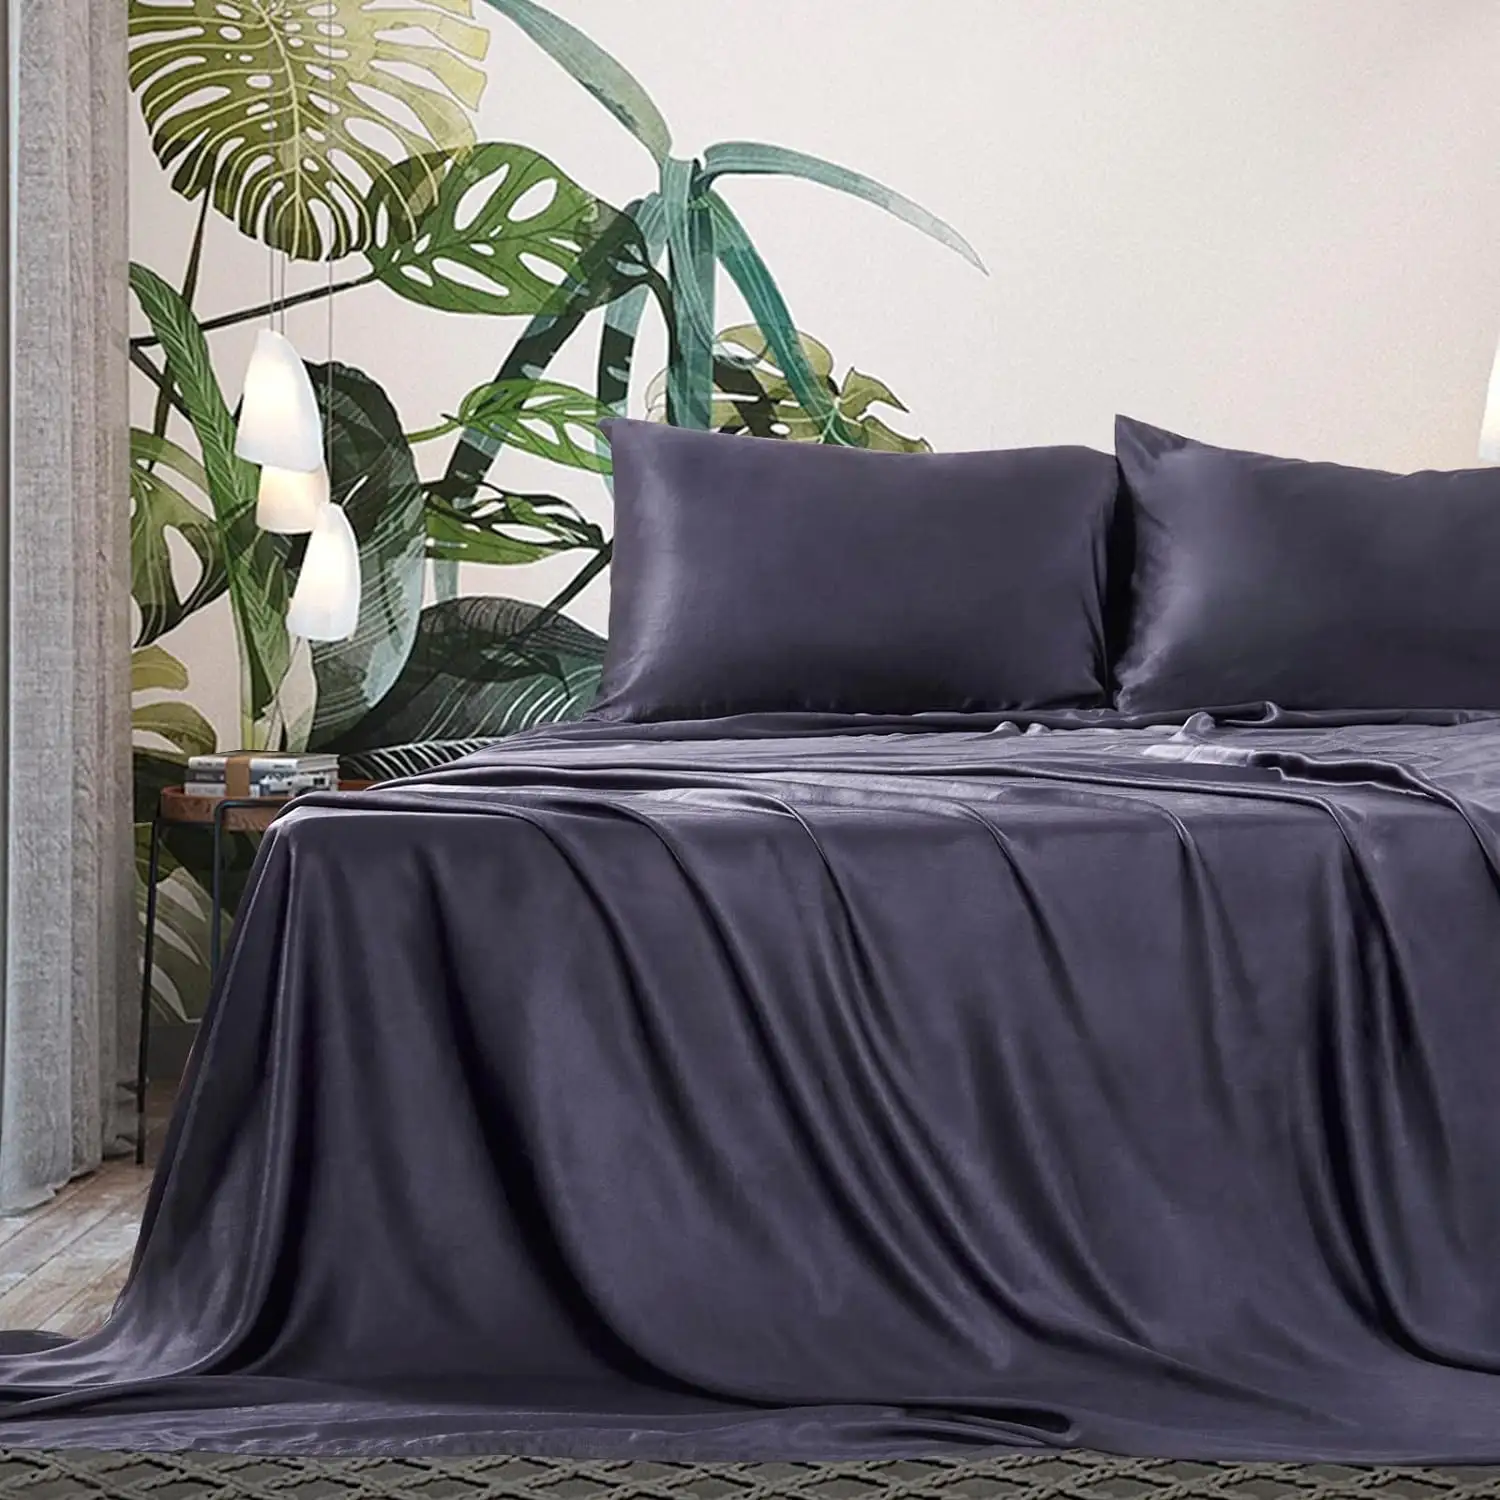 Luxury Bed Sheet Pure Tencel 100% King Size Bedsheet Bedding Set Lyocell Bed Sheets Bed Linen Deep Pockets